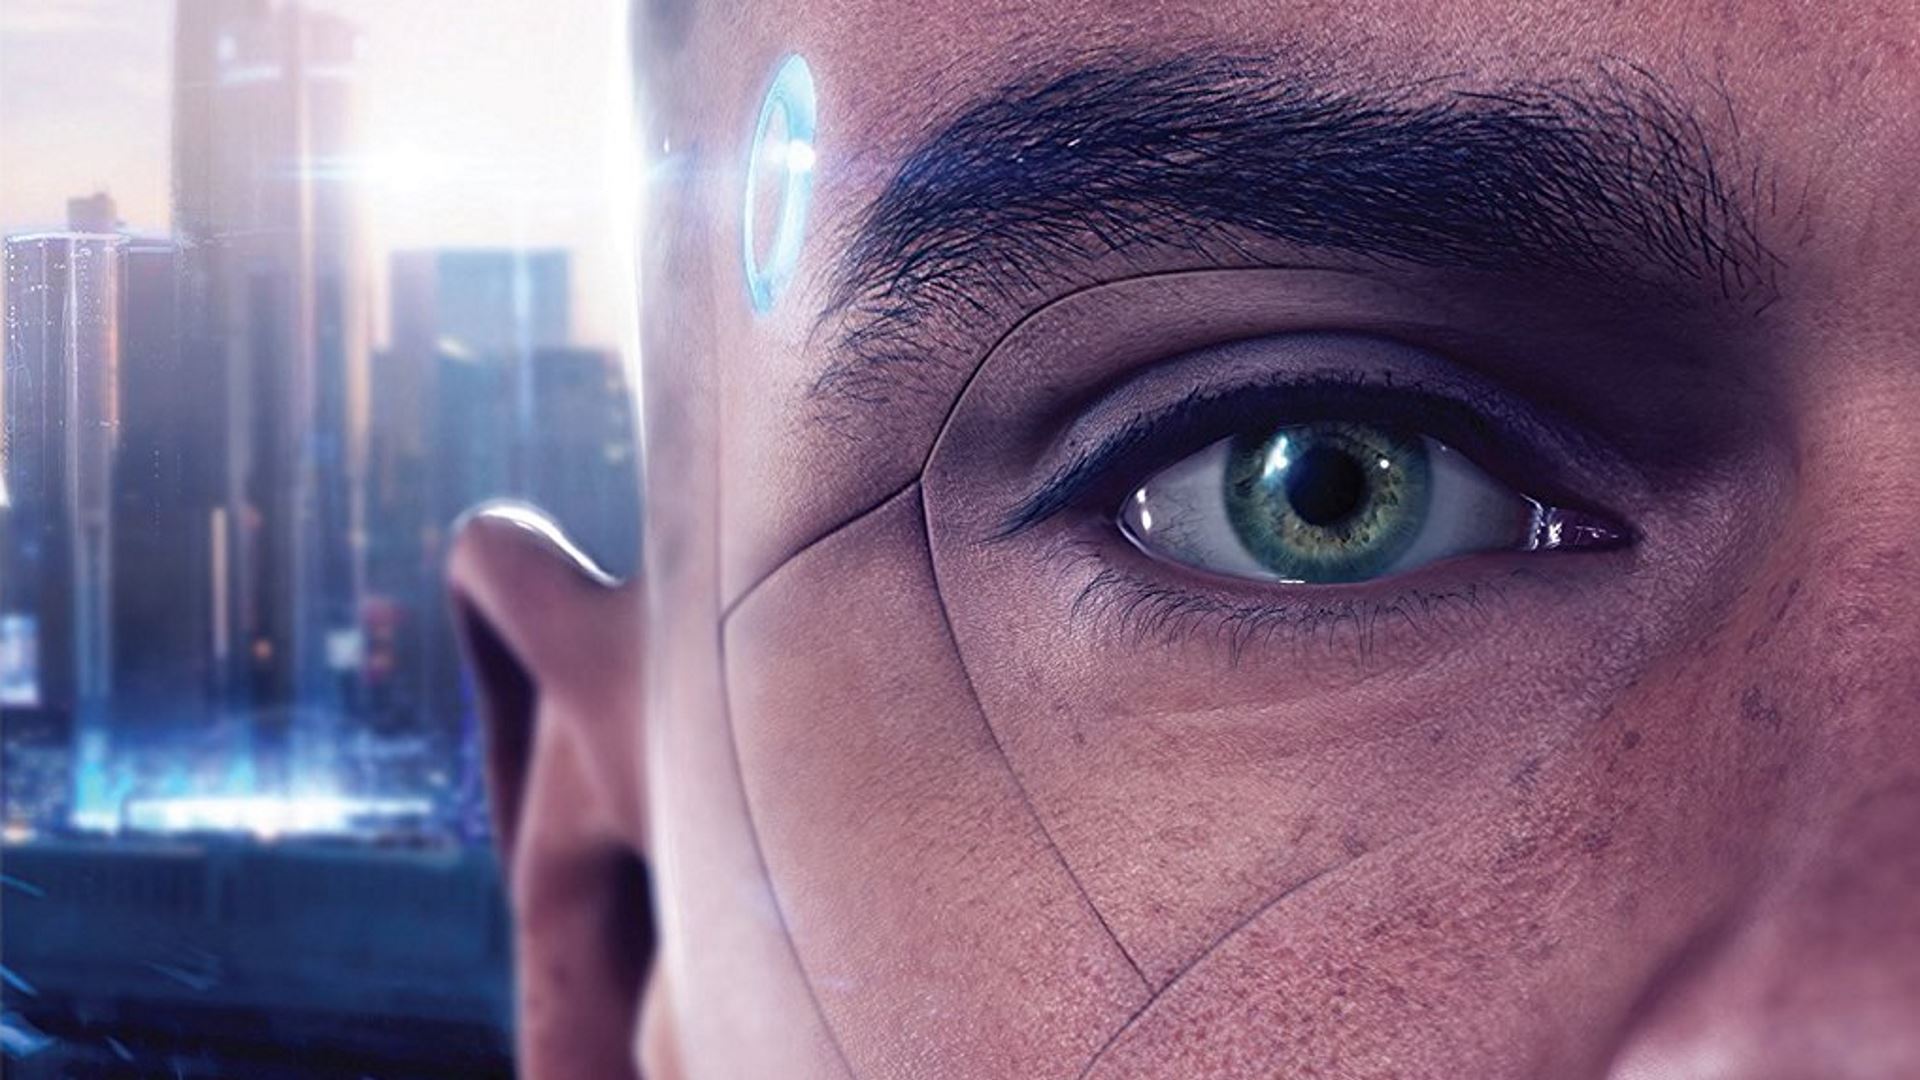 Detroit: Become Human (PS4 Pro) review